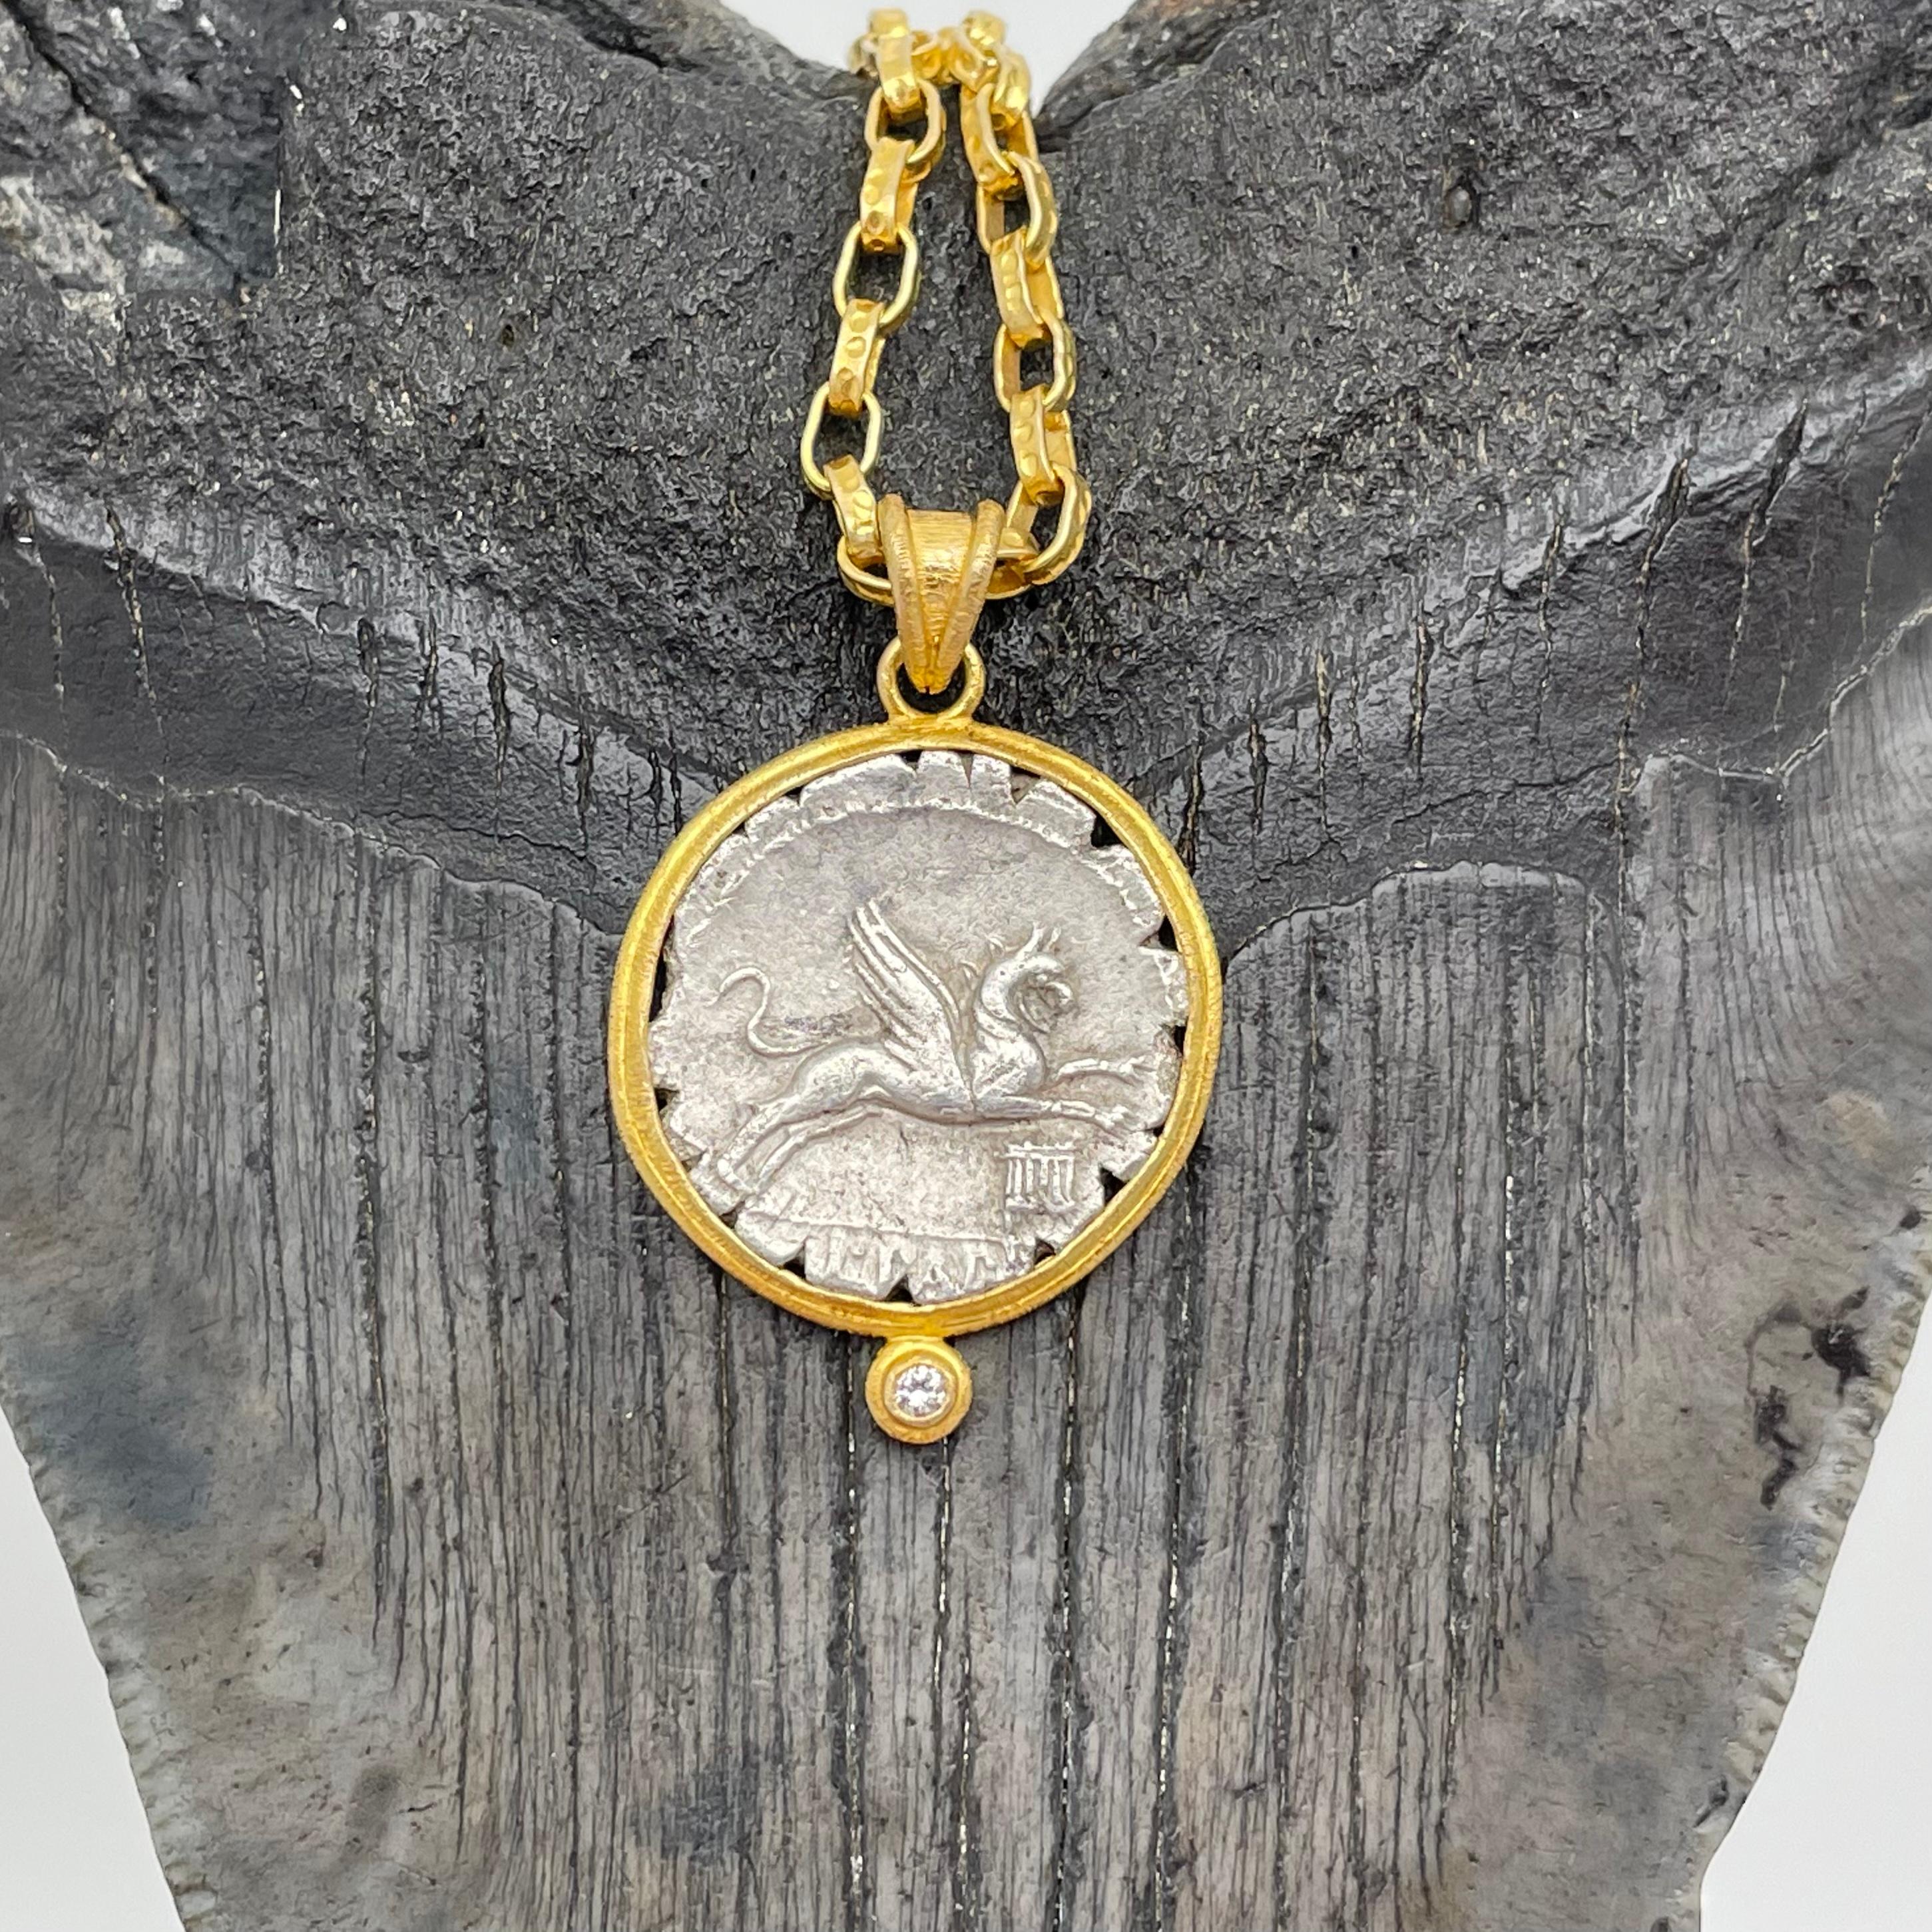 An interesting authentic silver denarius coin from the period of the Roman Republic 79 BC, featuring a griffin leaping, is set in a Steven Battelle ancient inspired matte-finish textured bezel mount with 1.8mm VS1 diamond accent.  The denarius was